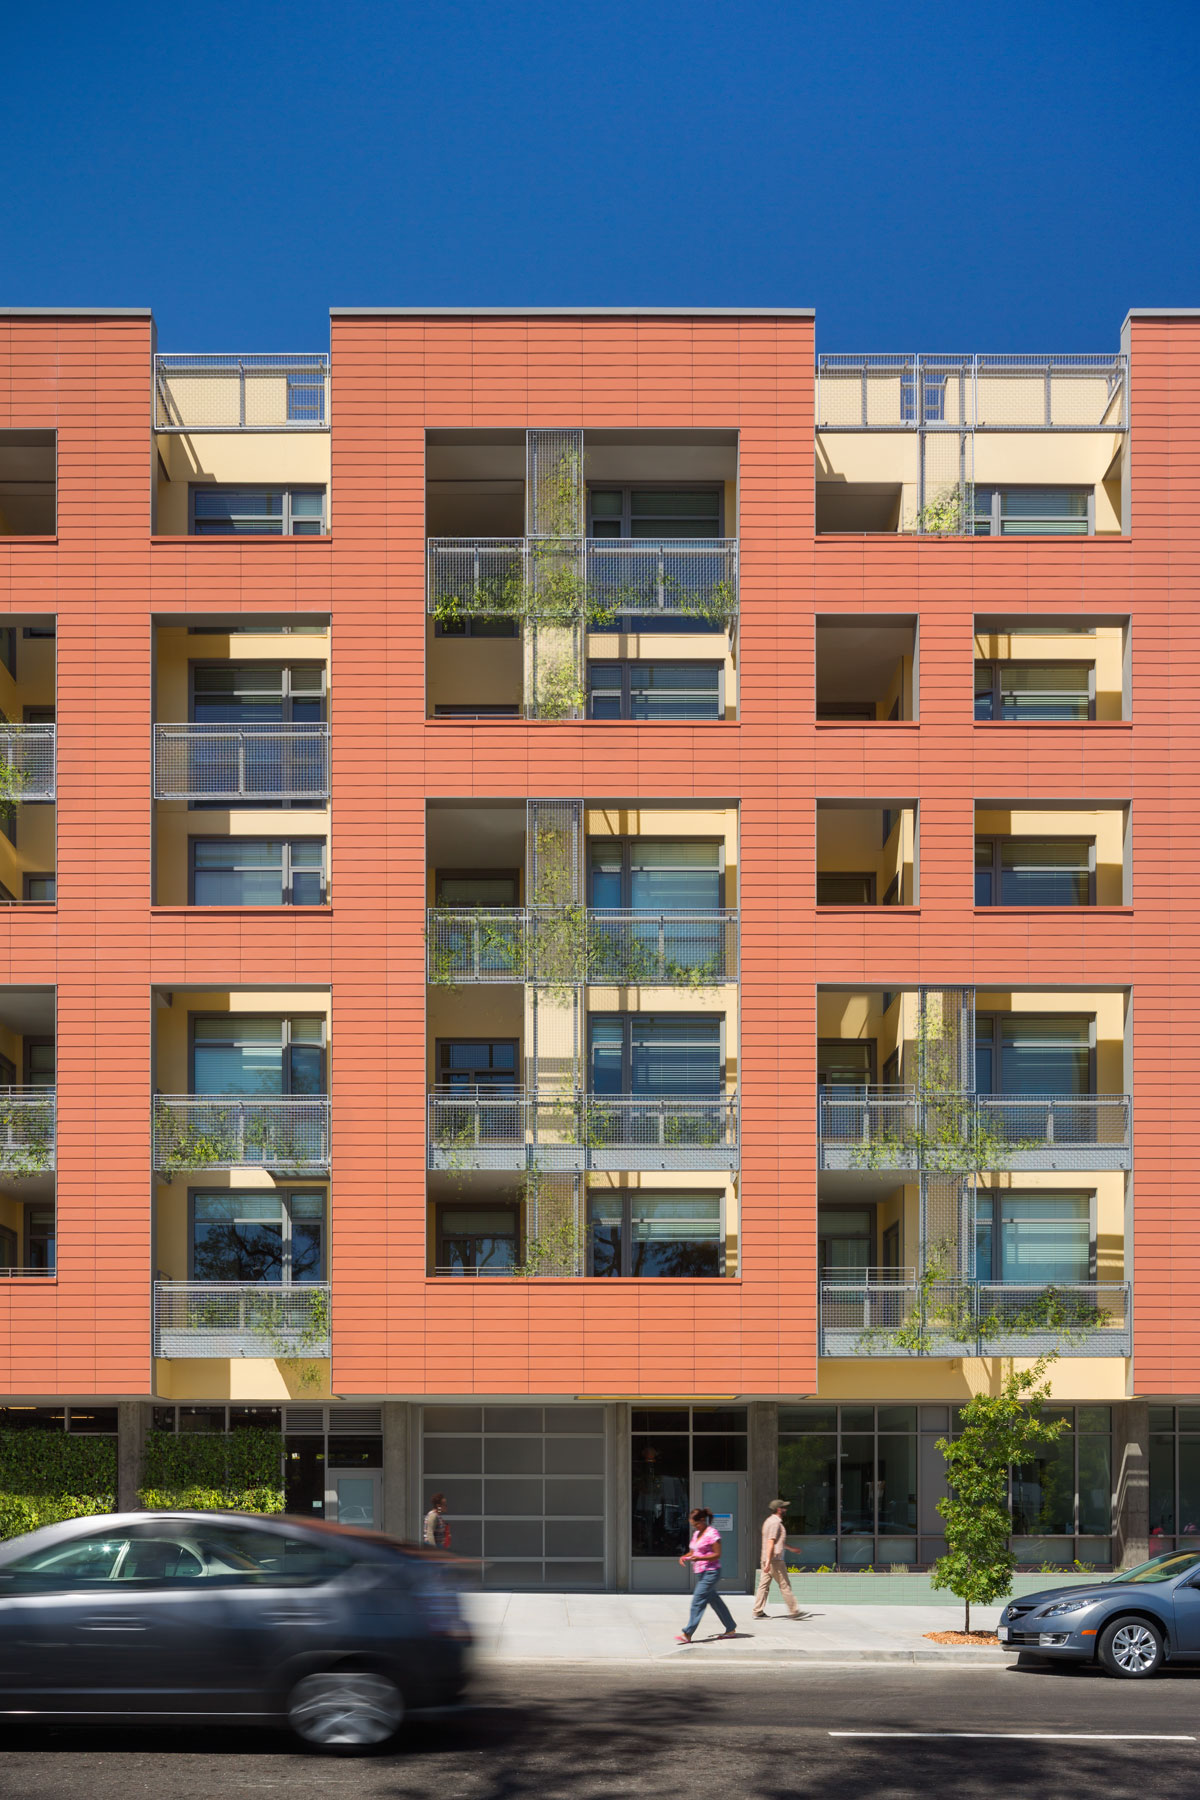 Merritt Crossing is a Green Point rated and LEED Platinum certified affordable housing building for seniors, a model of sustainable design in an urban area of Oakland in the Bay Area.